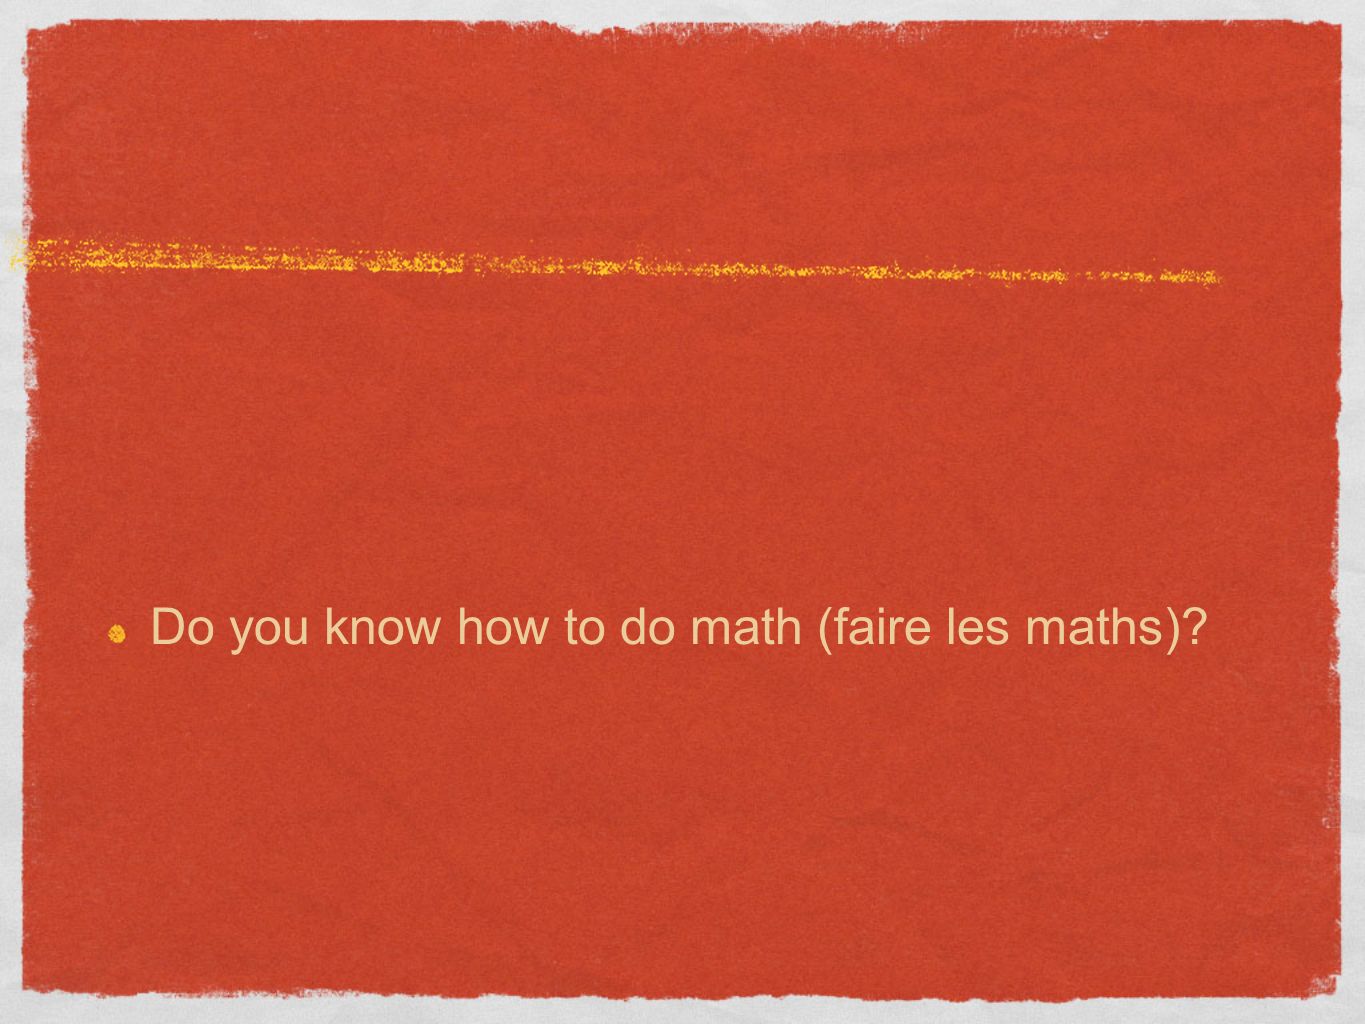 Do you know how to do math (faire les maths)